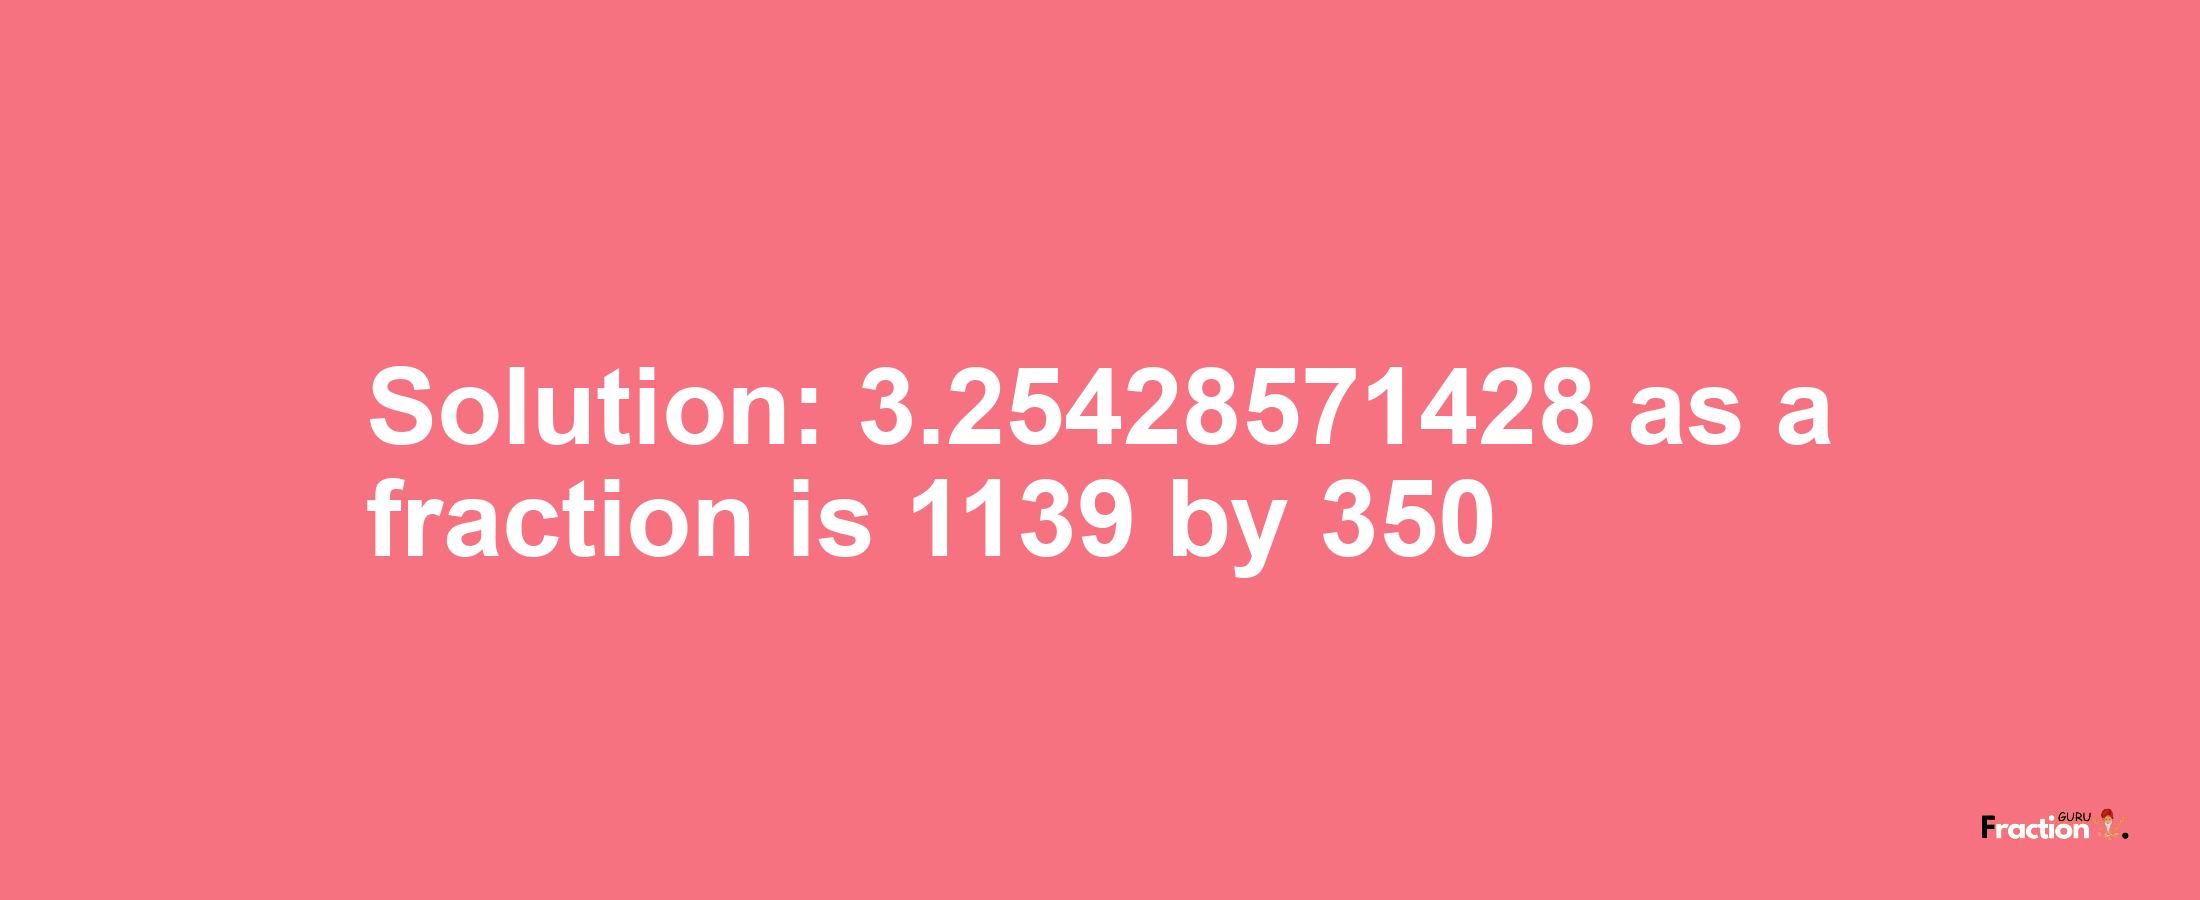 Solution:3.25428571428 as a fraction is 1139/350